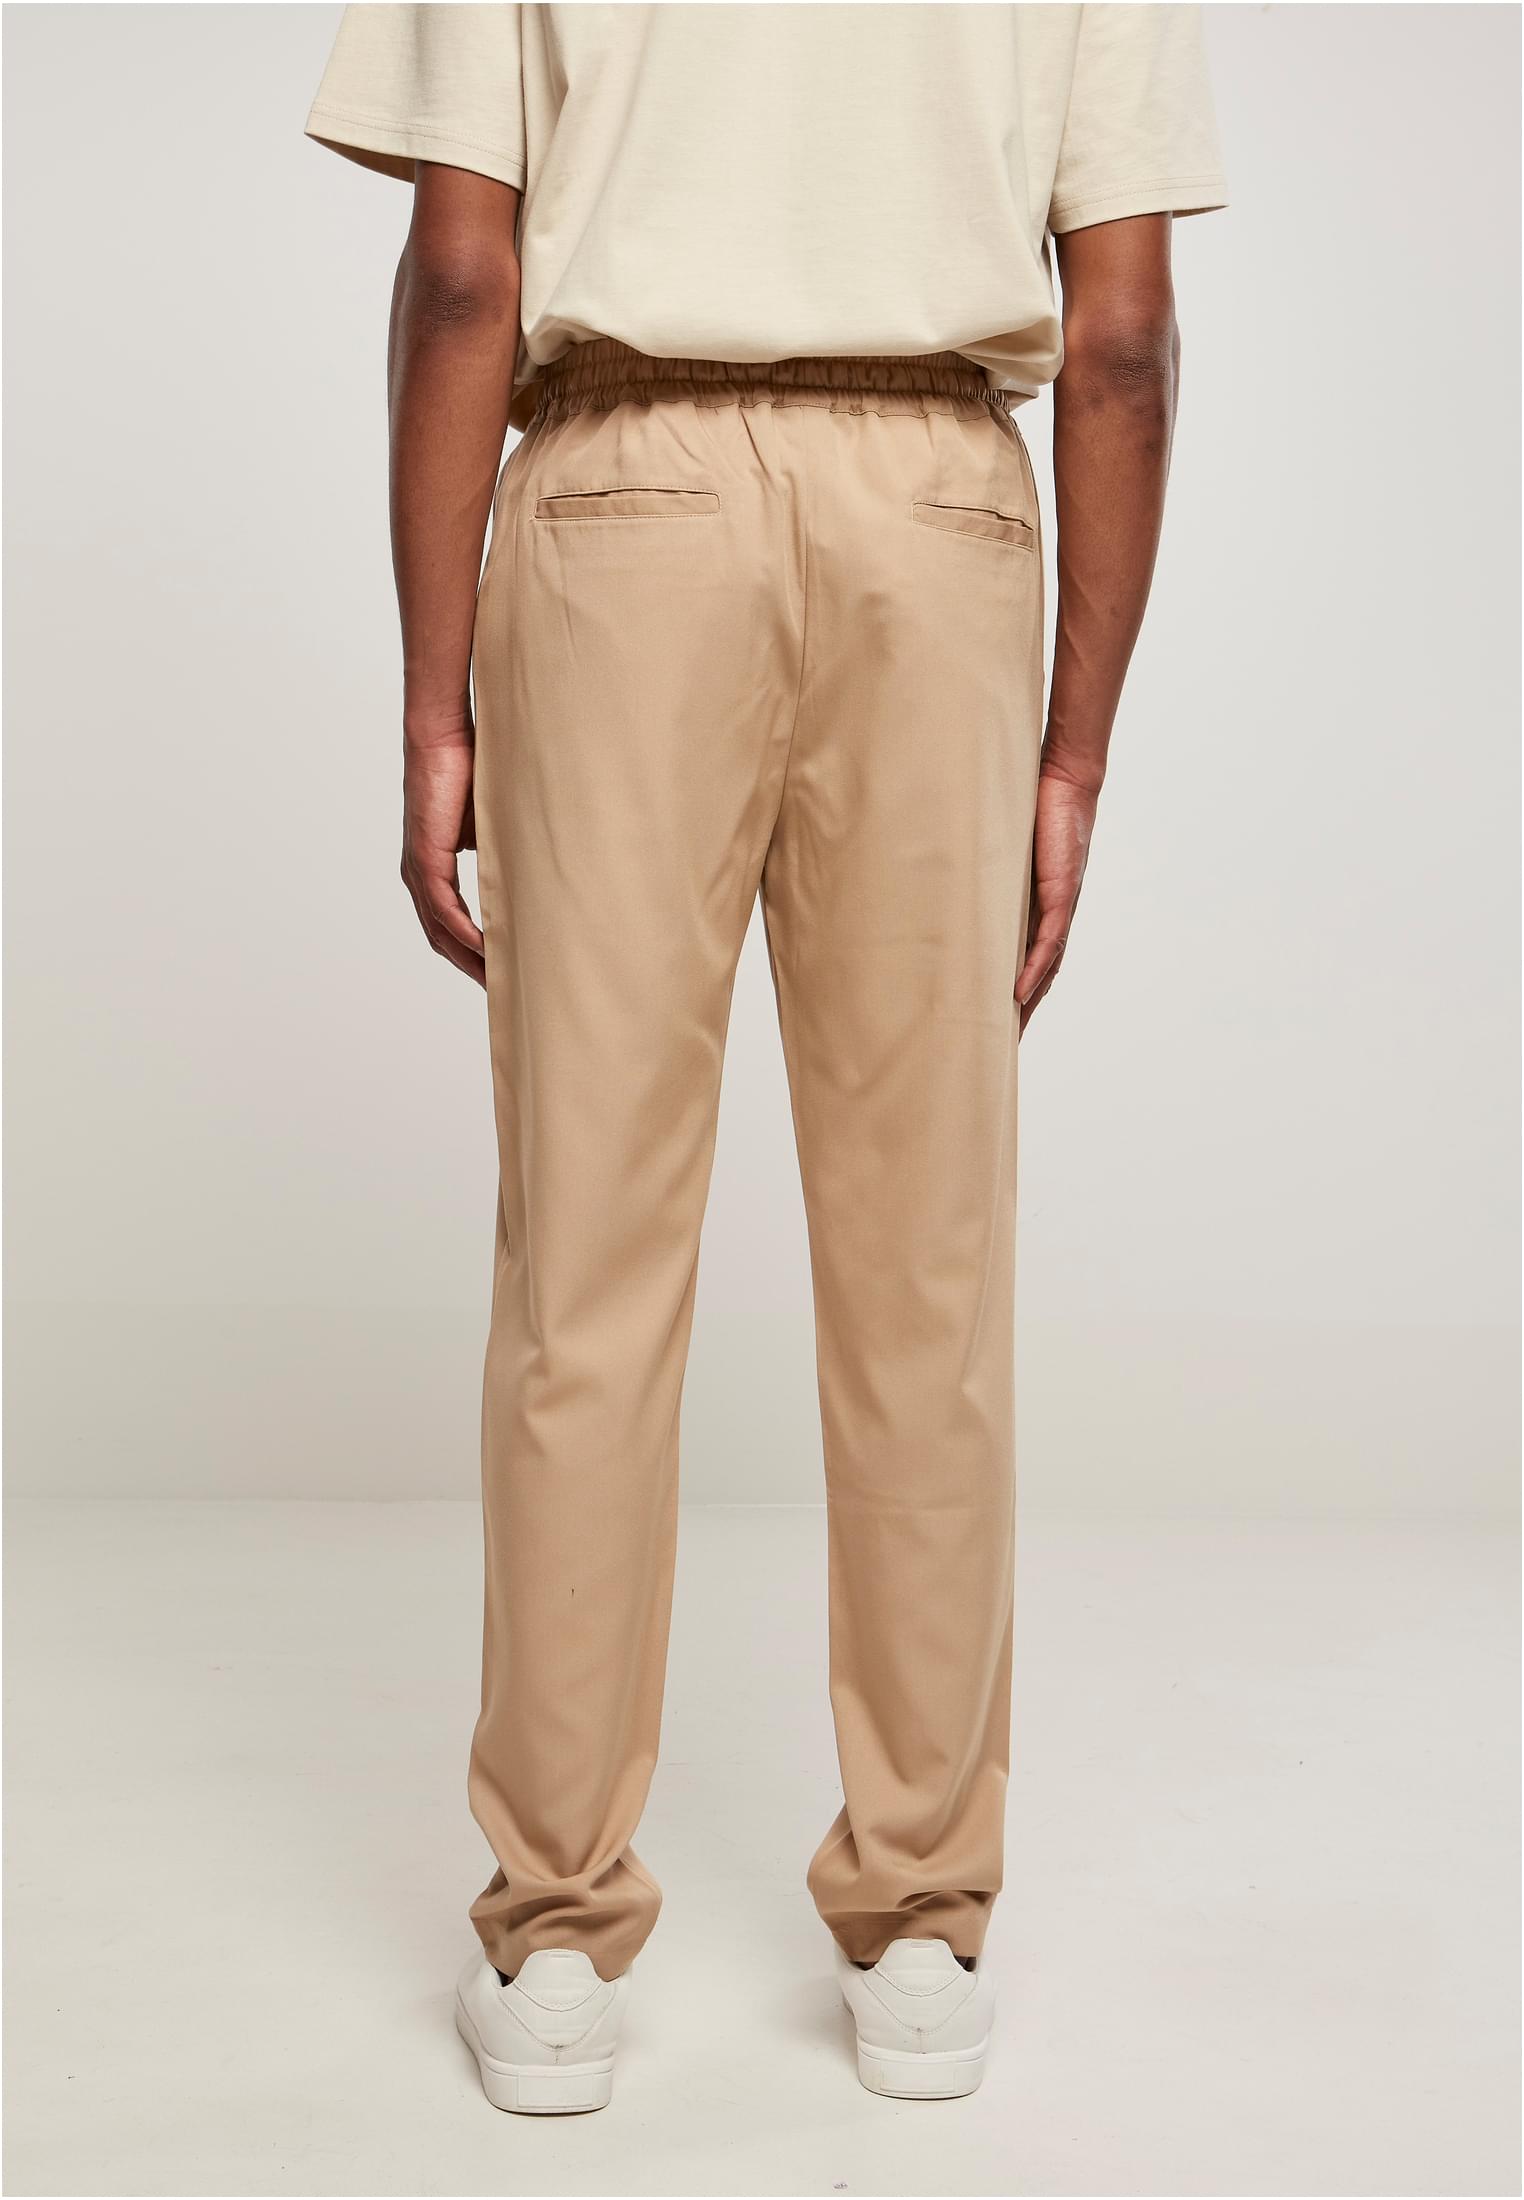 Sweatpants Tapered Jogger Pants in Farbe unionbeige